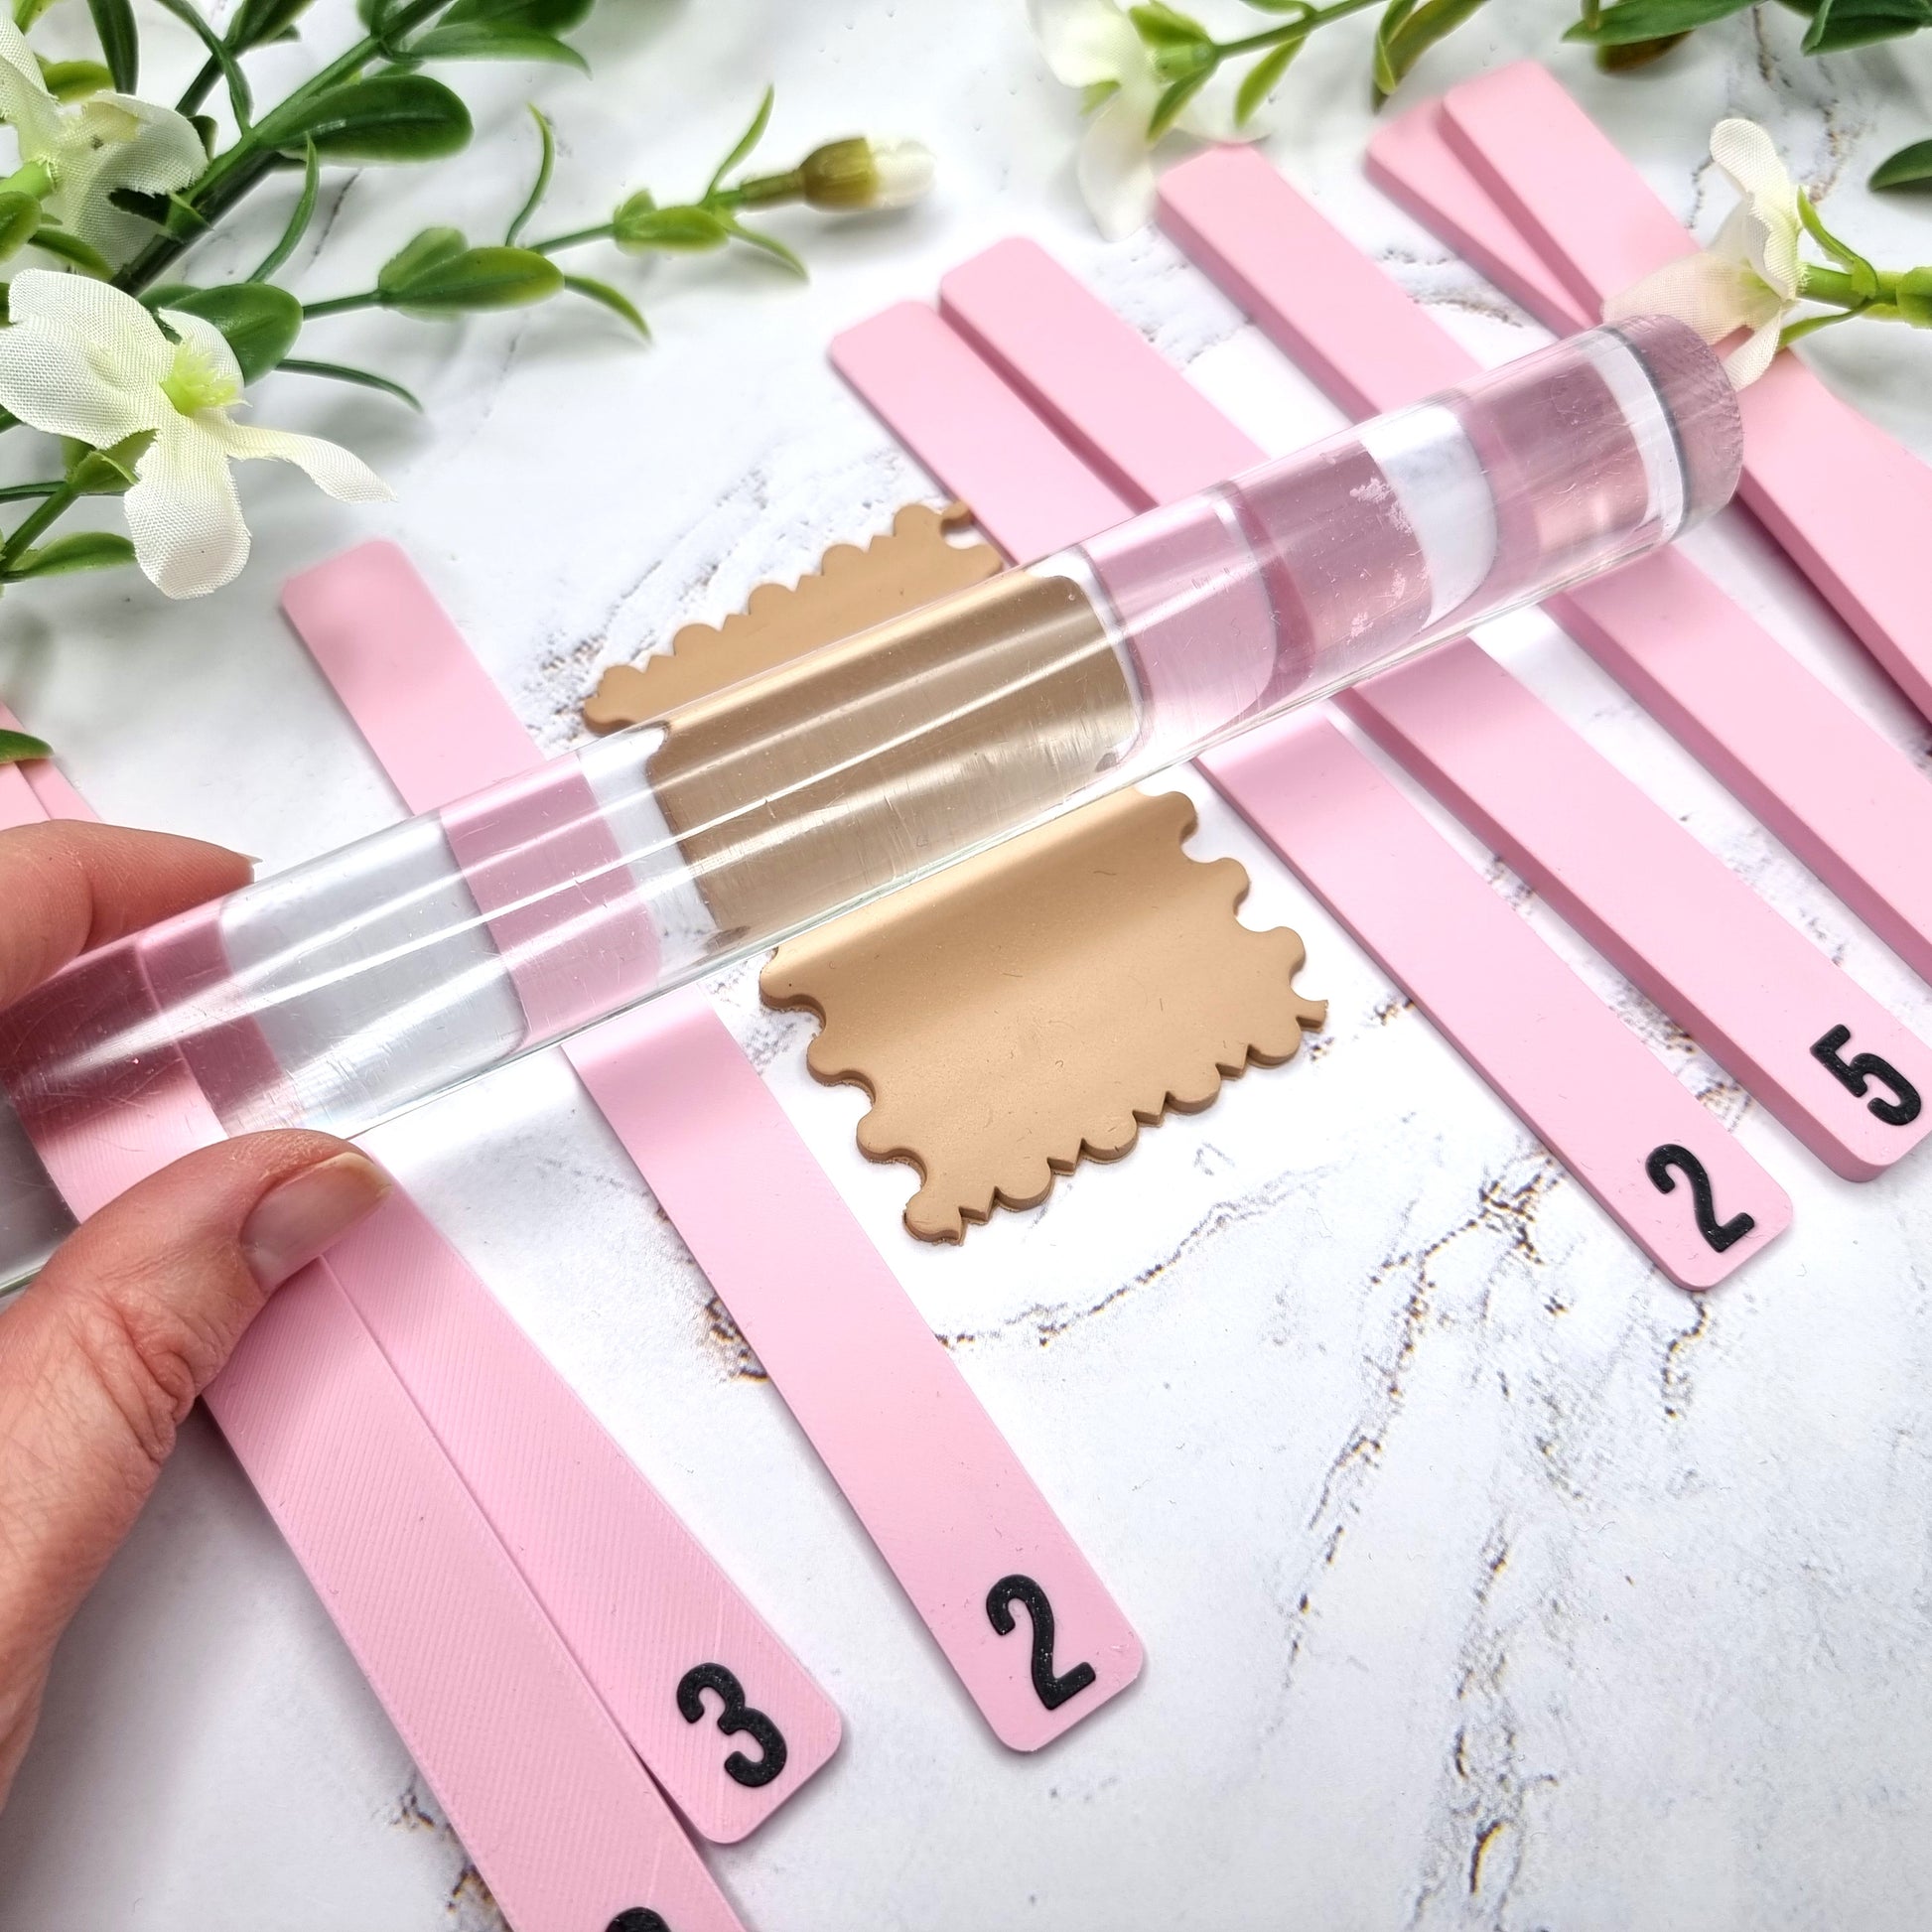 Clay Thickness Stick Rulers - Achieve Perfect, Uniform Clay Thickness Every Time  SweetyBijou   